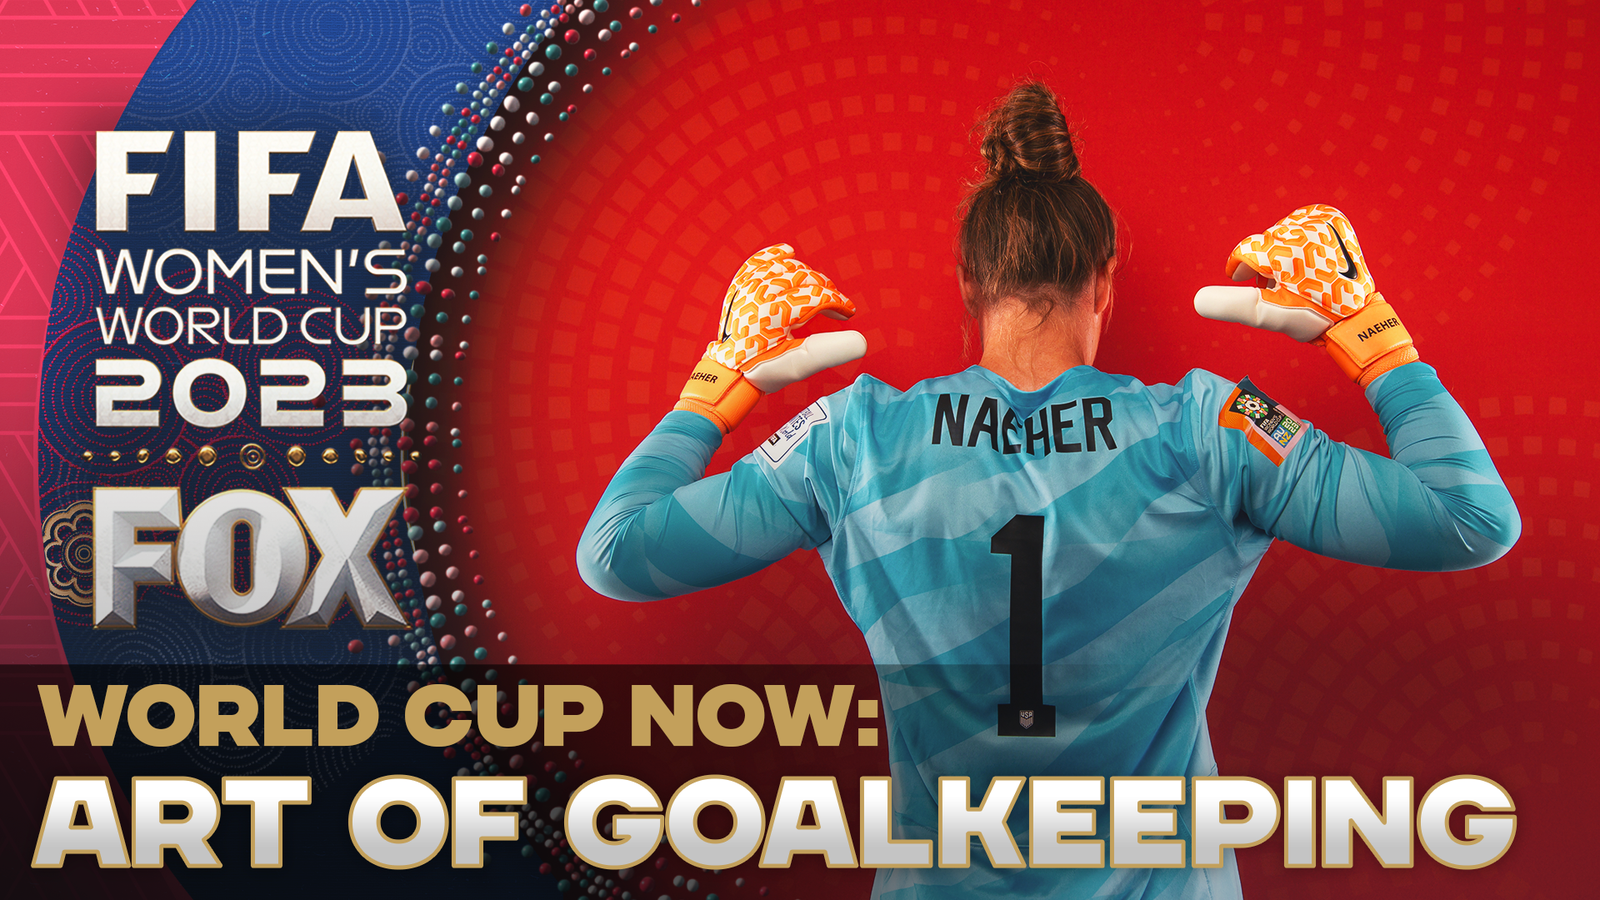 Karina LeBlanc and the "World Cup Now" crew talk about the "Art of Goalkeeping"